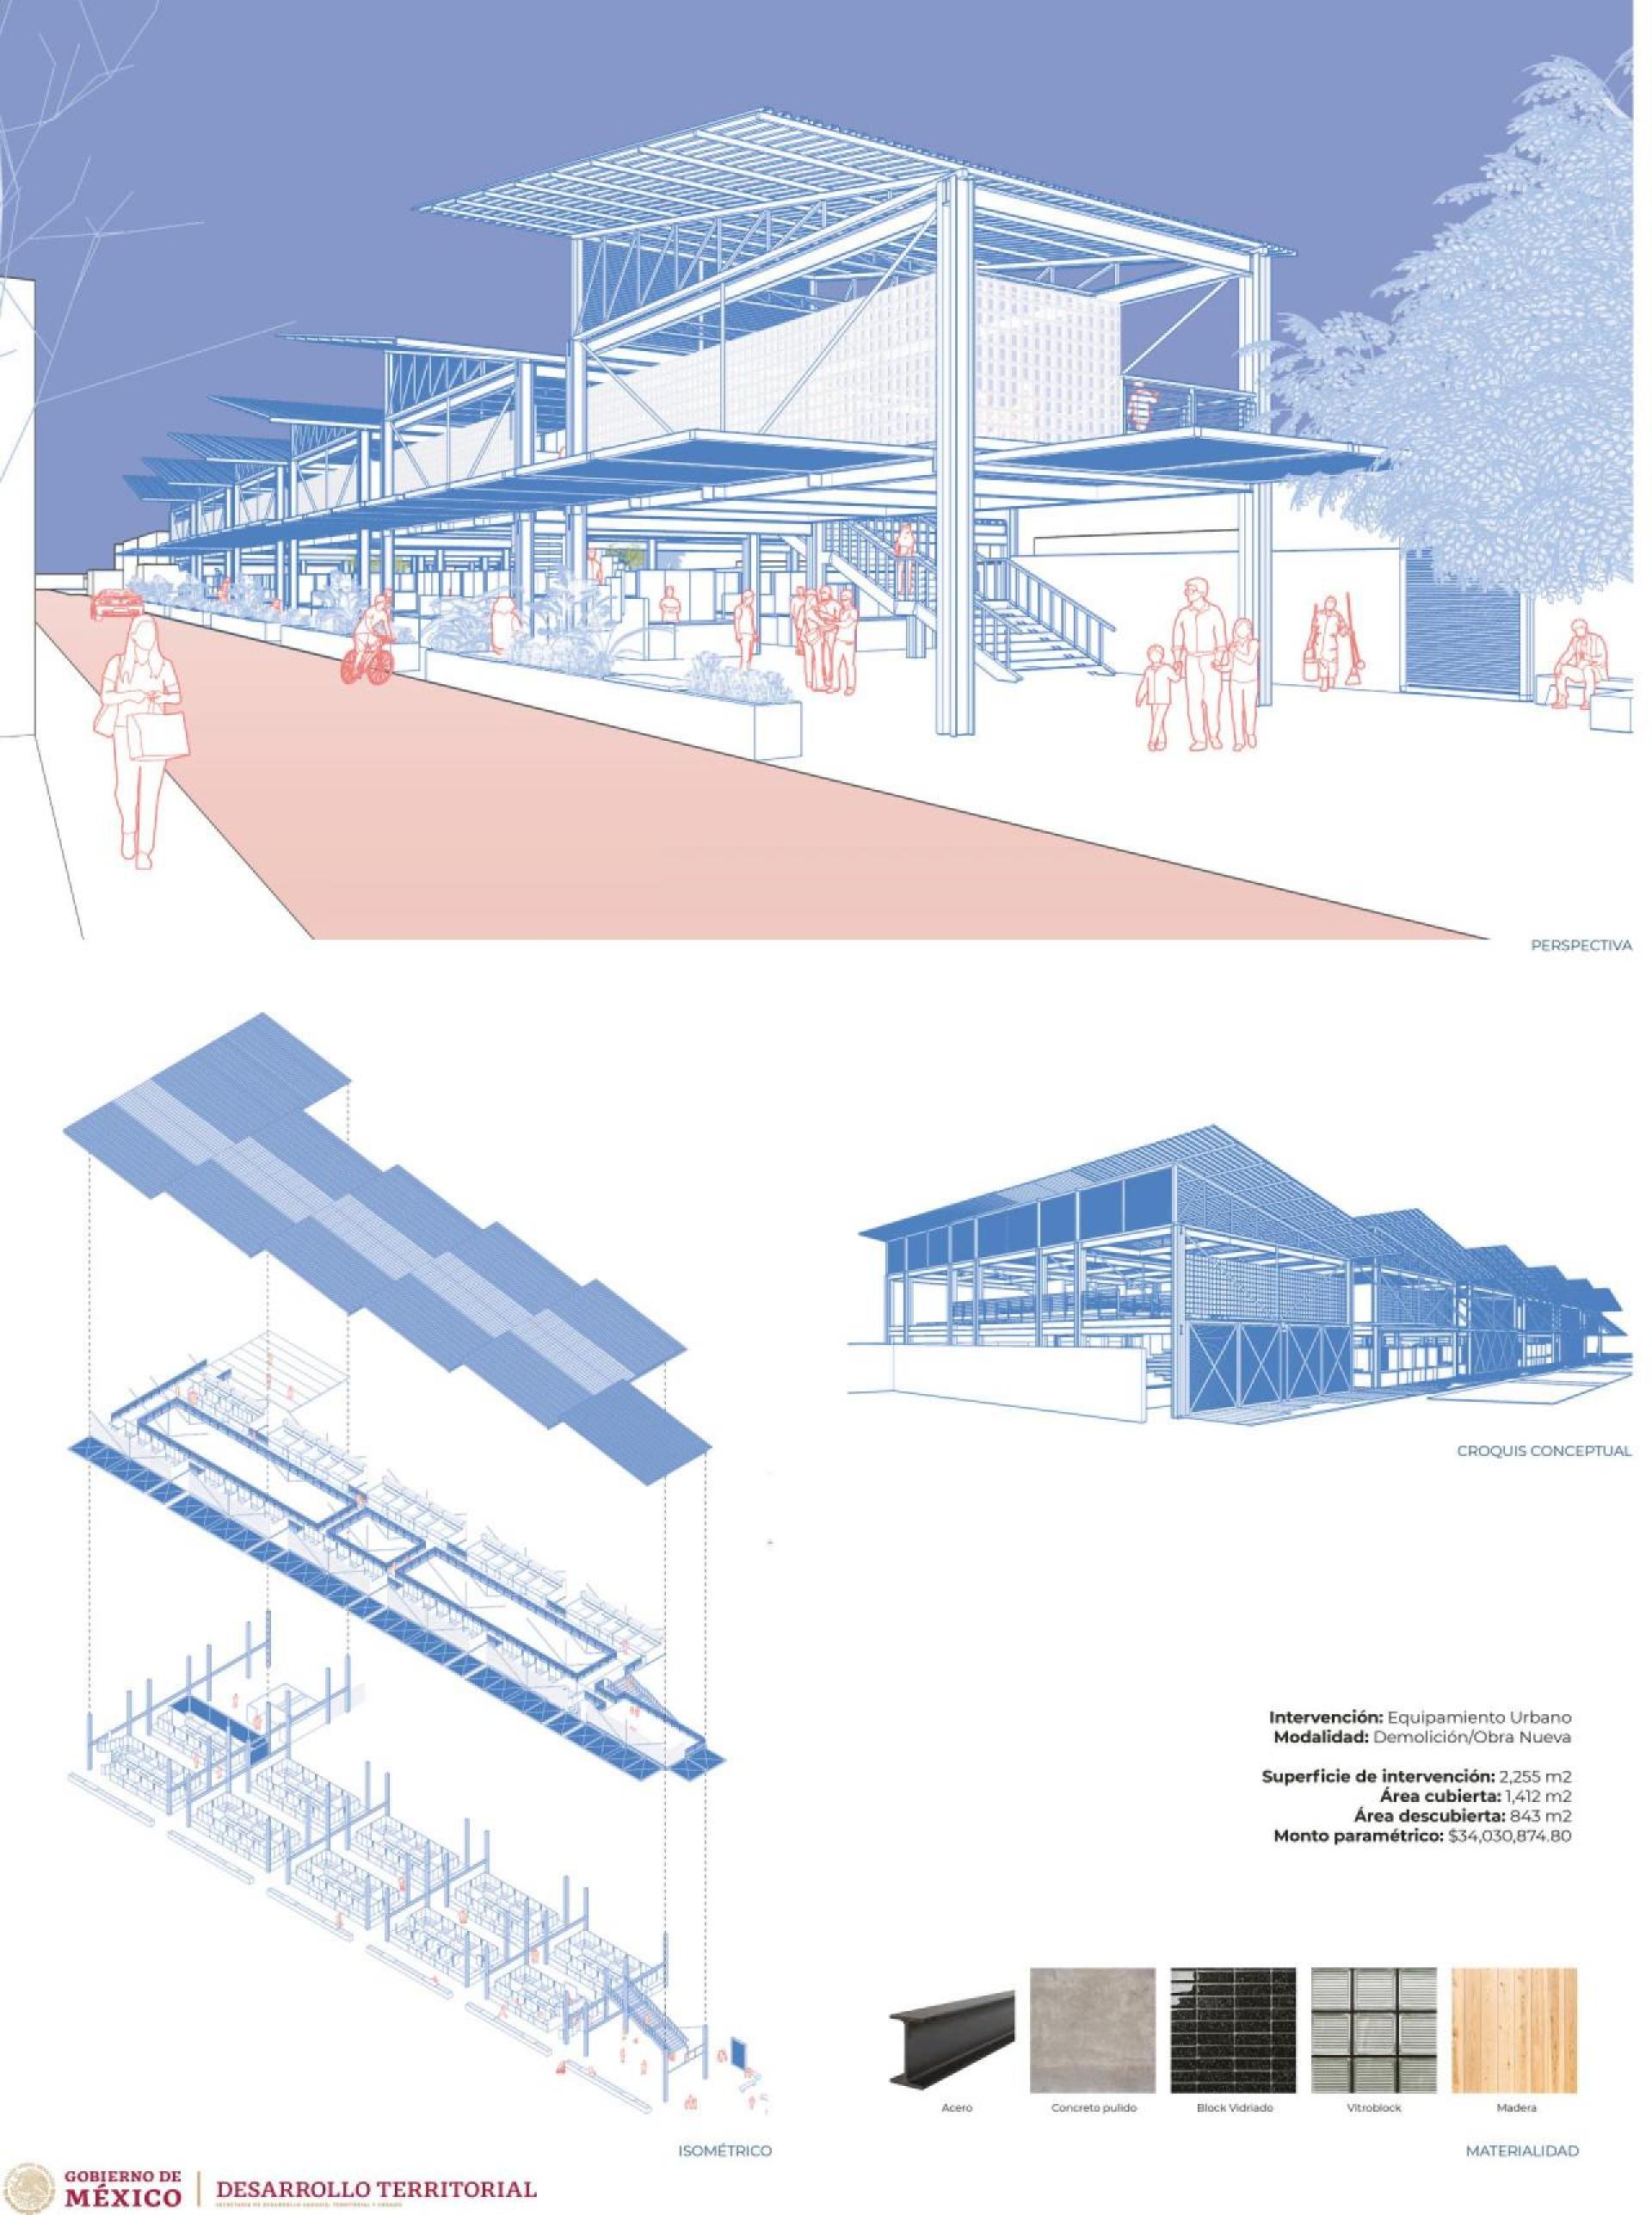 The proposal of an Urban Acupuncture by LAU for the Cedar market of Comitán de Dominguez.